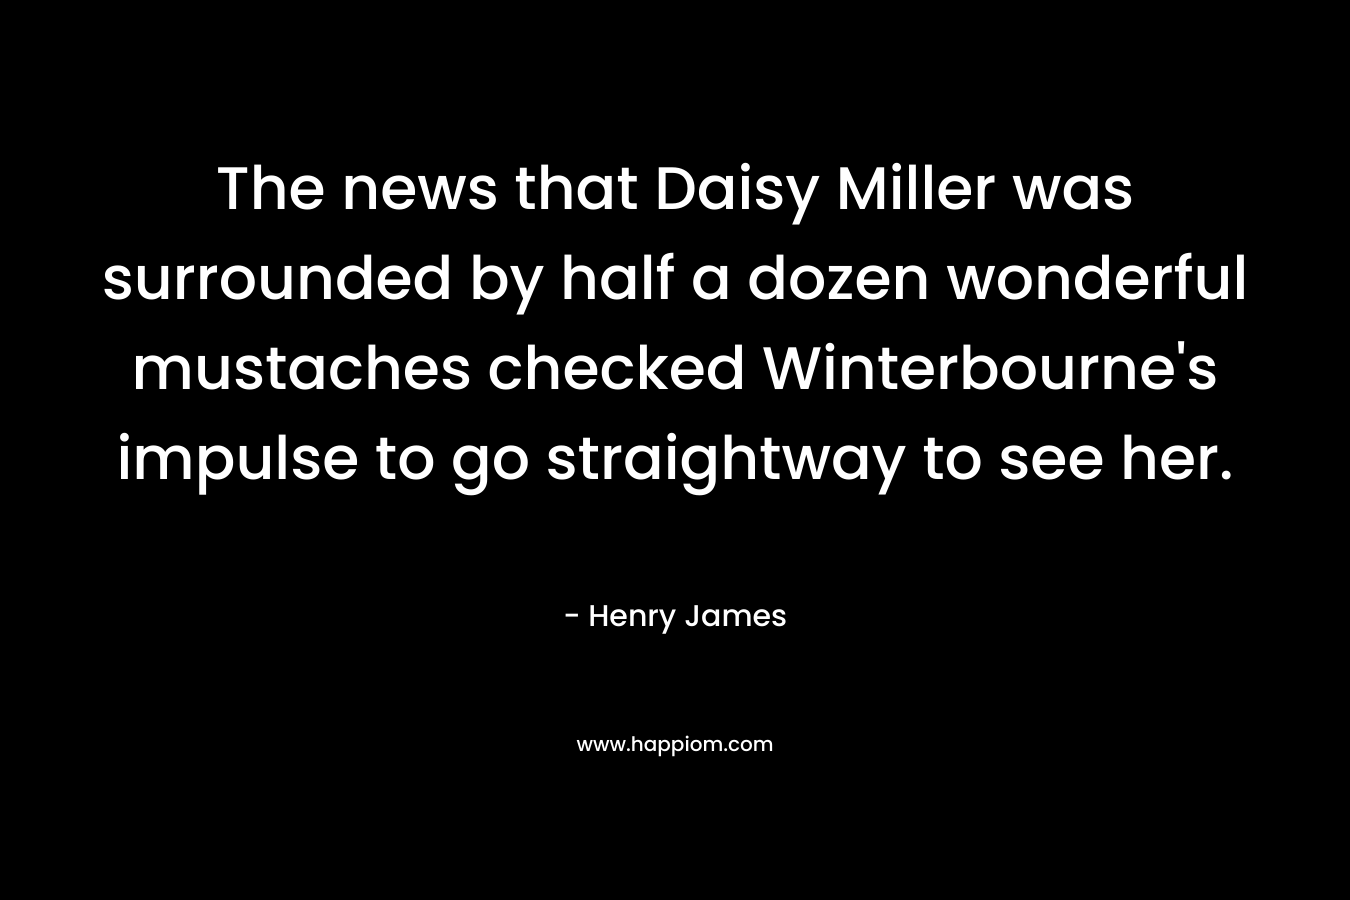 The news that Daisy Miller was surrounded by half a dozen wonderful mustaches checked Winterbourne’s impulse to go straightway to see her. – Henry James